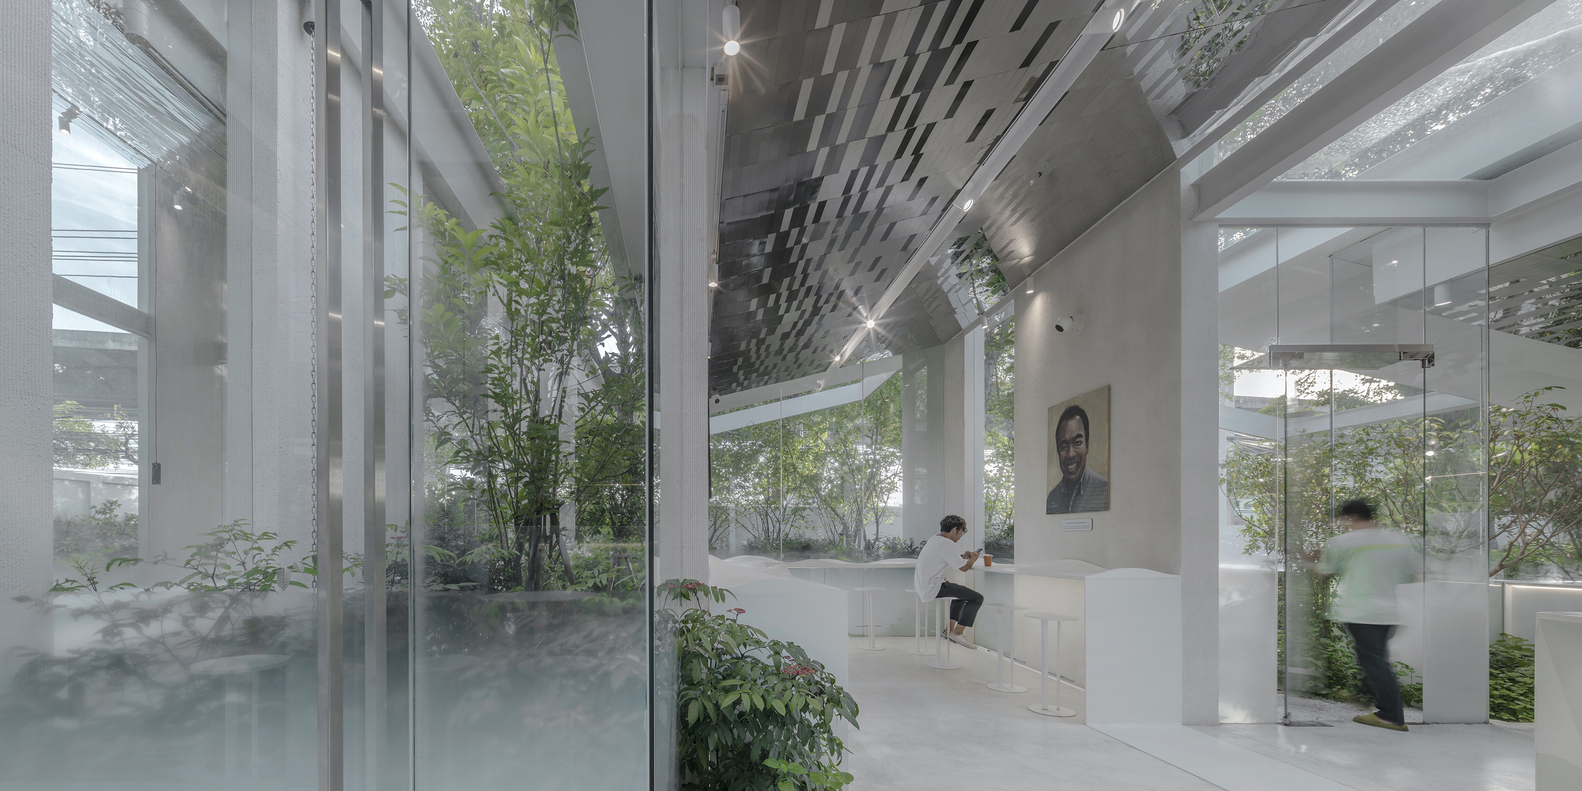 Glass Material Unites Interior Space with Landscape